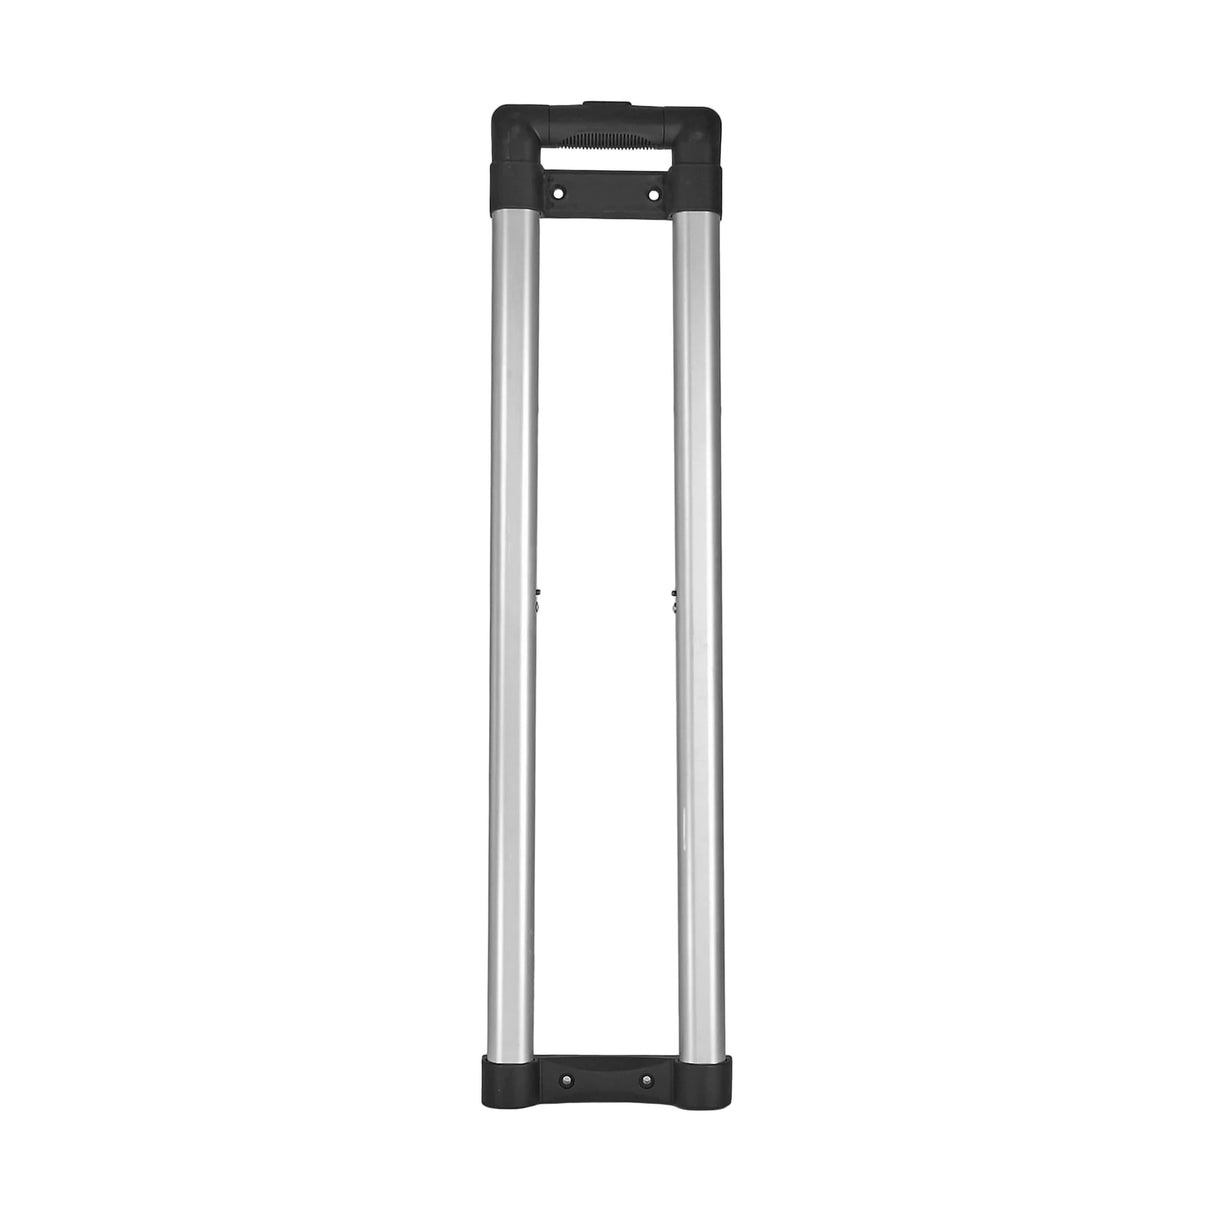 26 1/2", Black/Silver, 2 Stage Pull Handle Assembly, Plastic/Zinc Alloy, #XPH-05